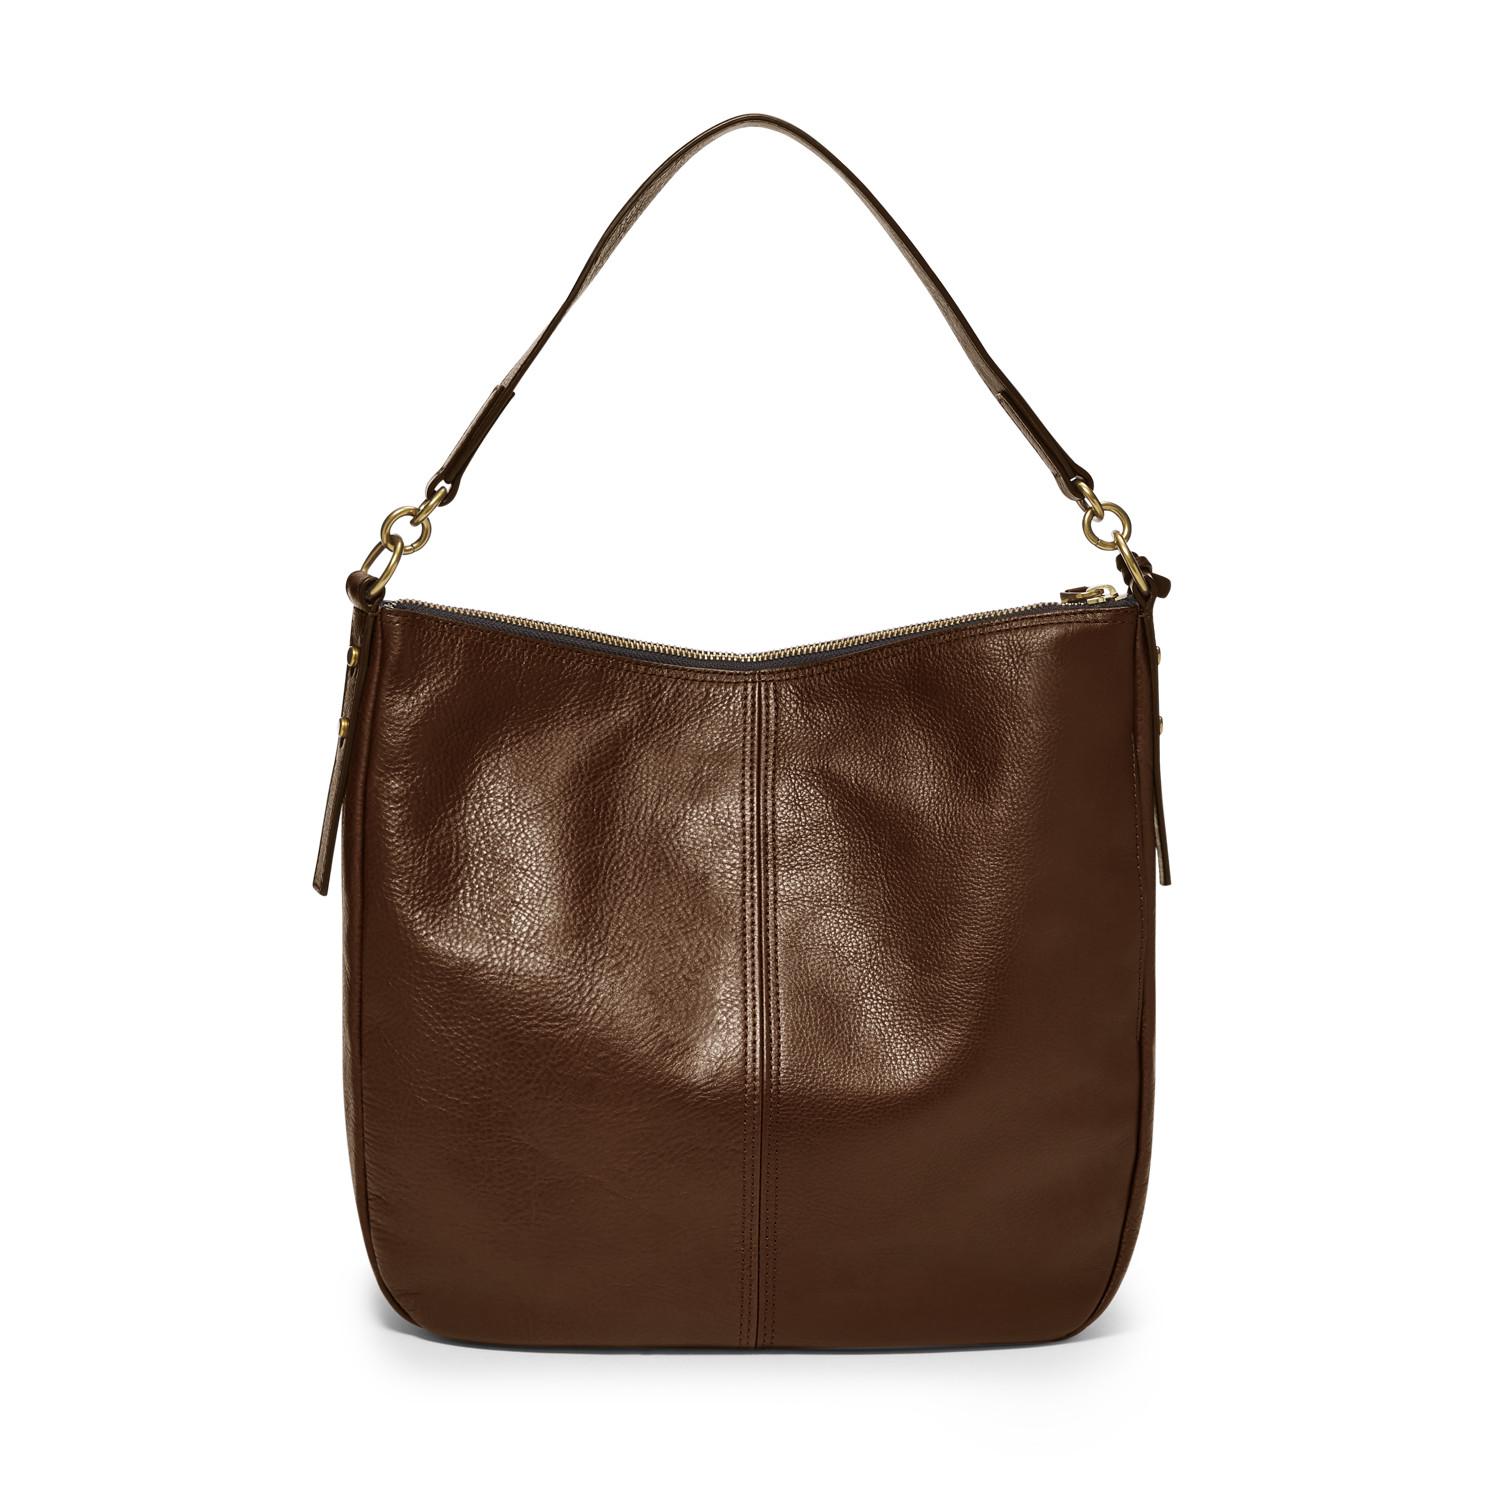 Fossil Leather Jolie Hobo in Brown - Lyst